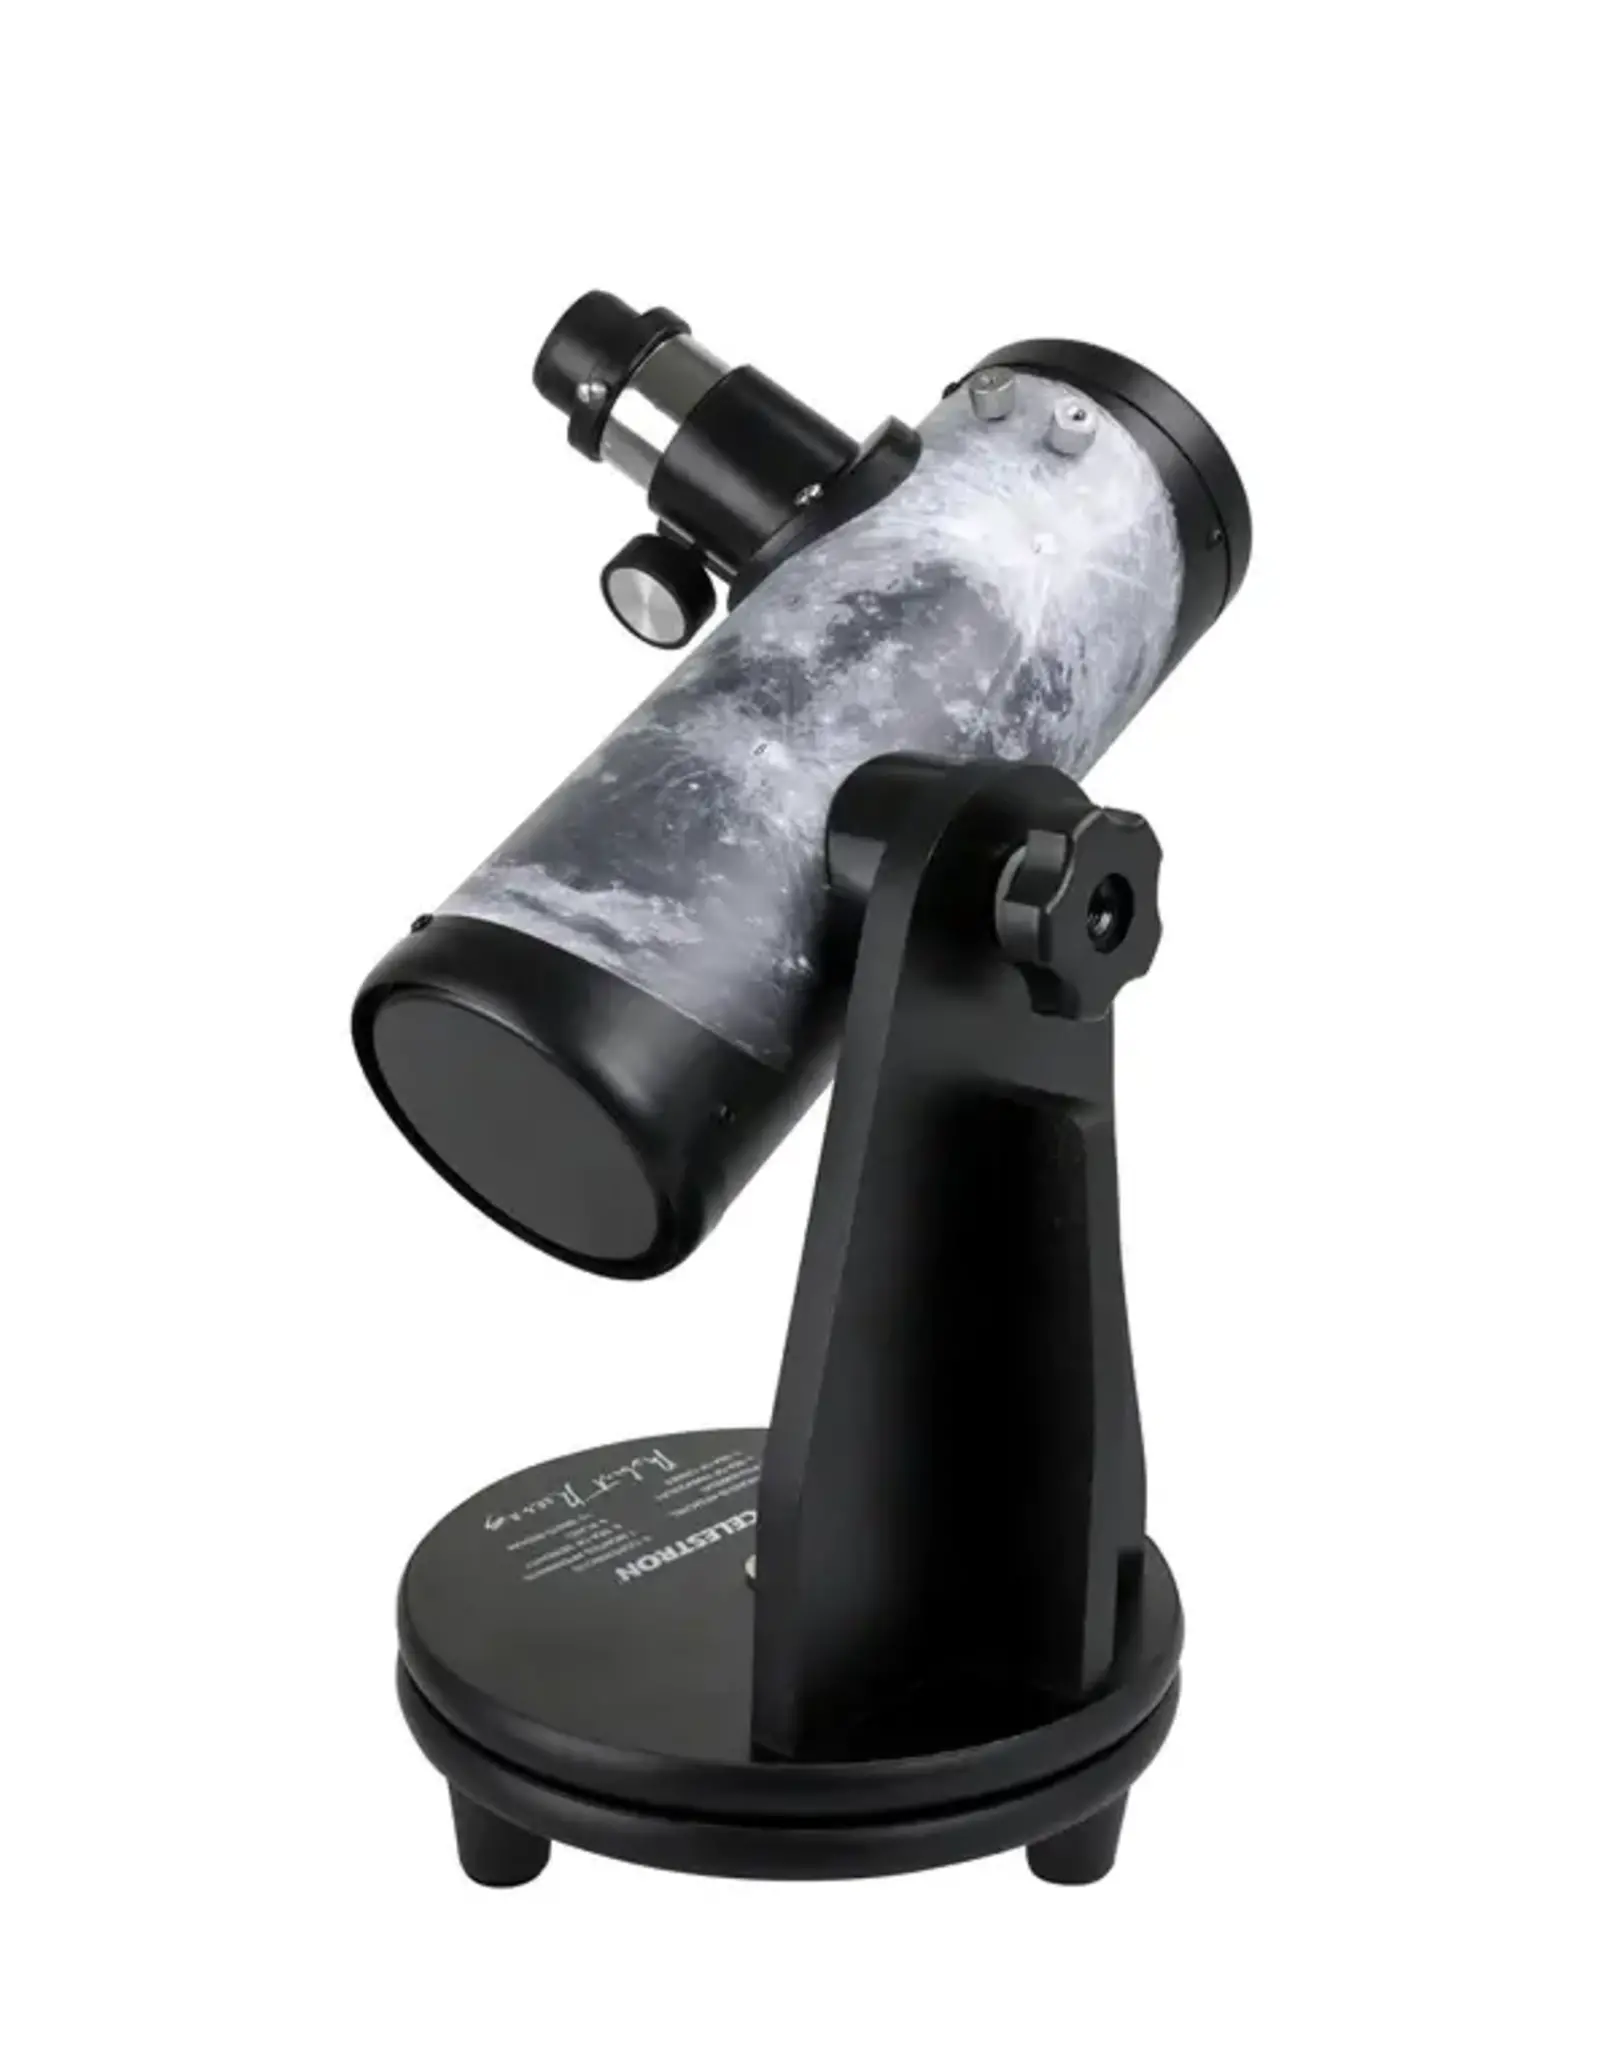 Celestron Celestron FirstScope Signature Series Moon by Robert Reeves